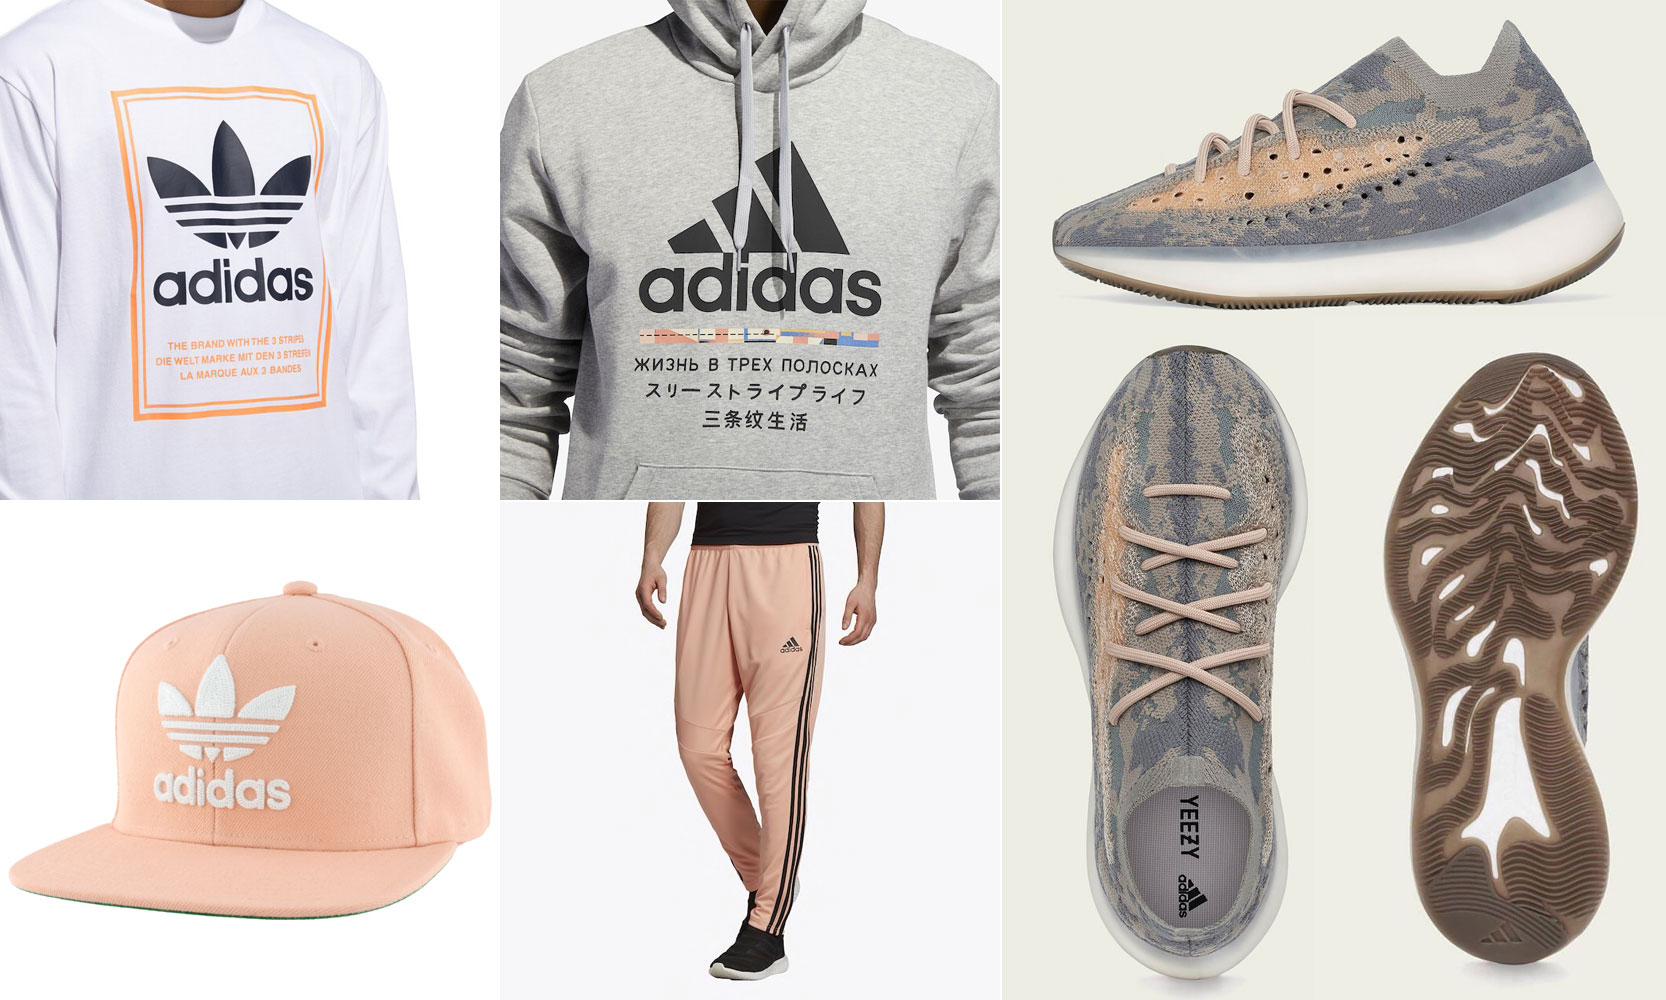 yeezy-boost-380-mist-clothing-outfits